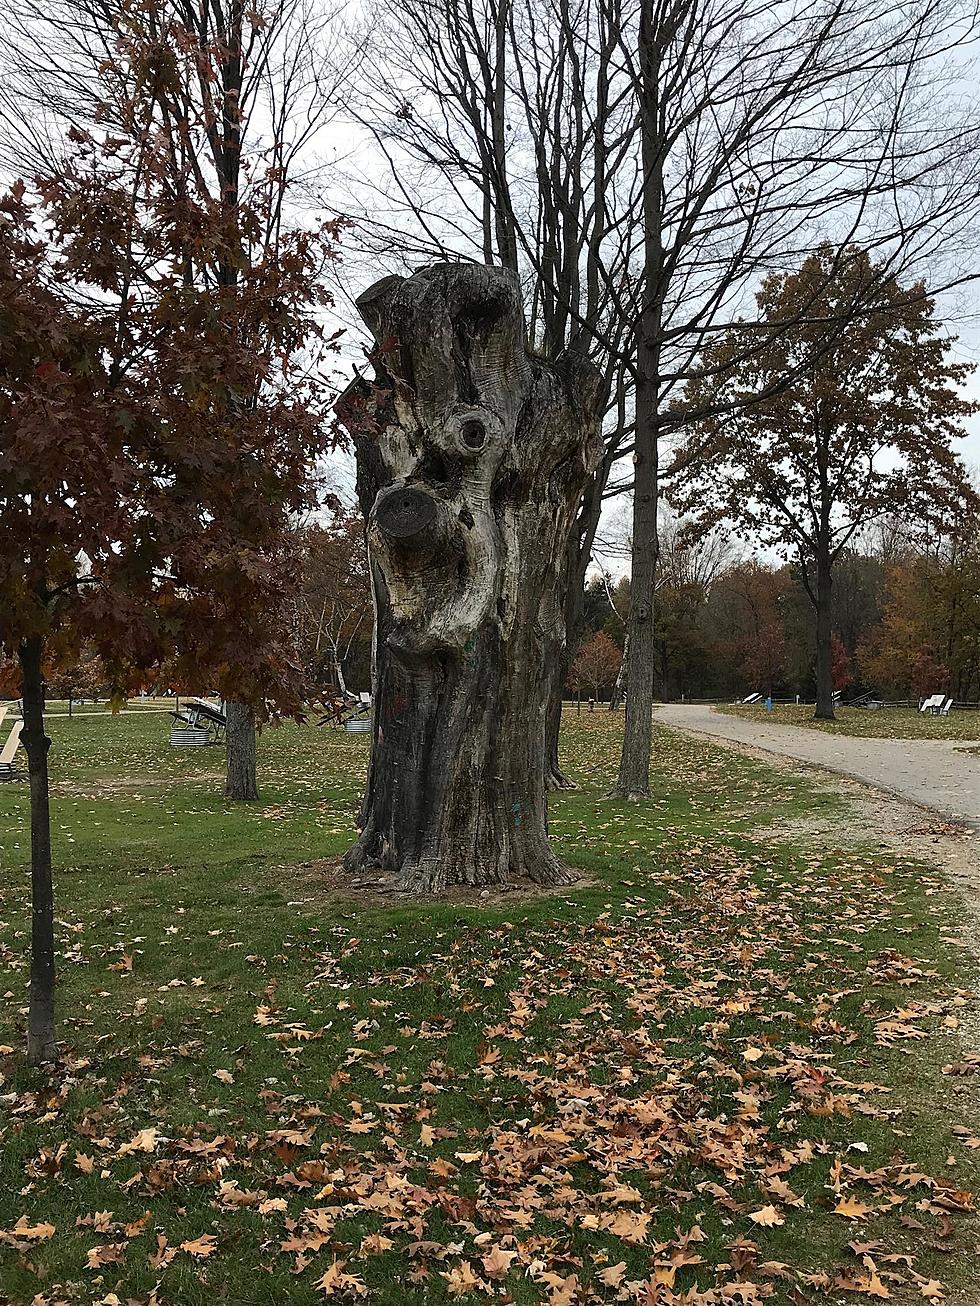 A Michigan State Park Landmark is Gone as the ‘Bear Tree’ Collapsed at Lakeport State Park